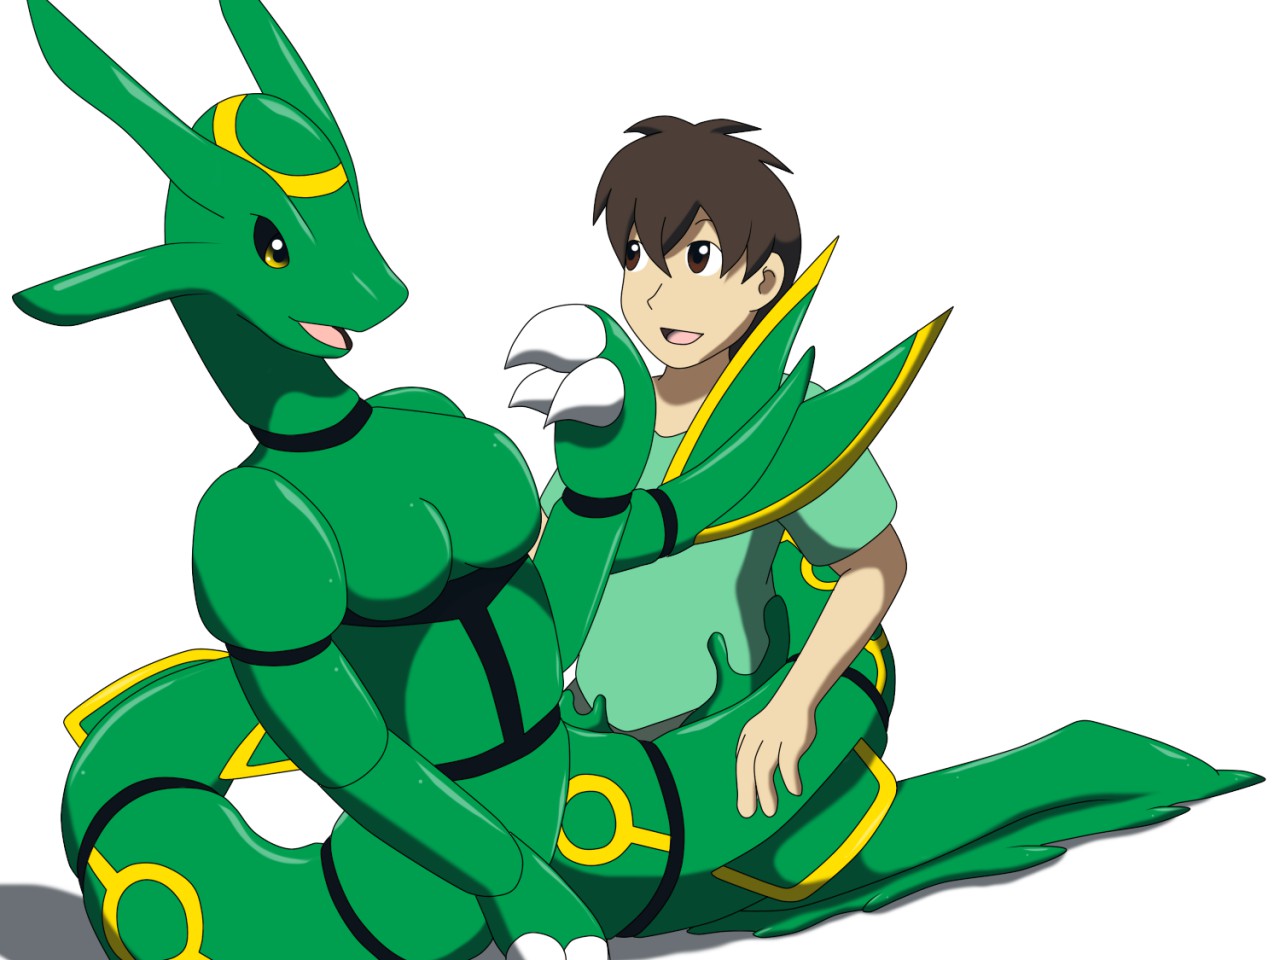 Rayquaza Cloning Goo TF TG Pt 1. 2299 submissions. 